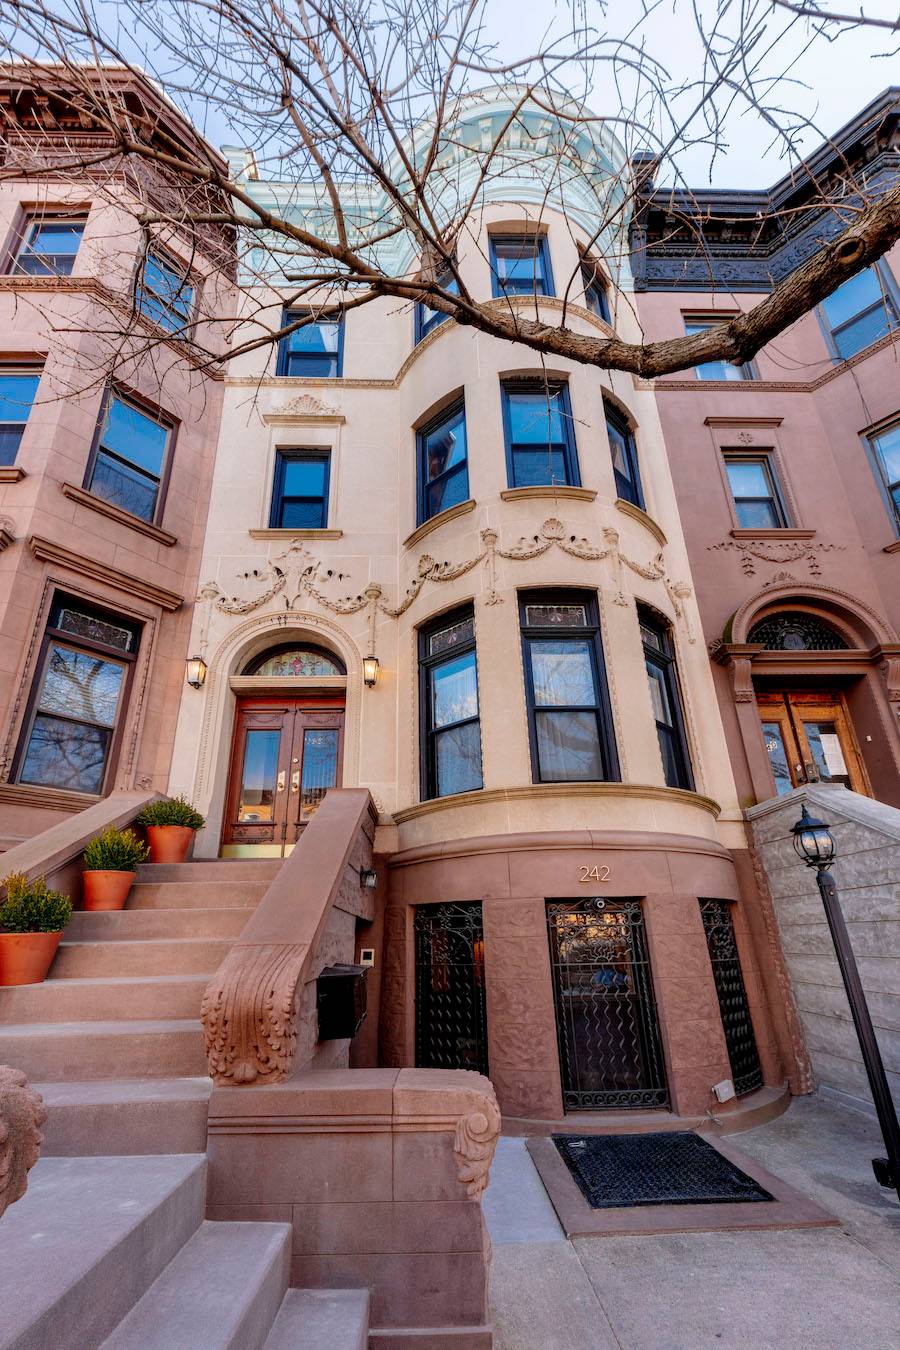 Elegant Limestone in Stuyvesant Heights Built at the turn of the 19th century, and part of the Stuyvesant Heights landmark district designated in 1971, 242 Decatur Street resides on one ...